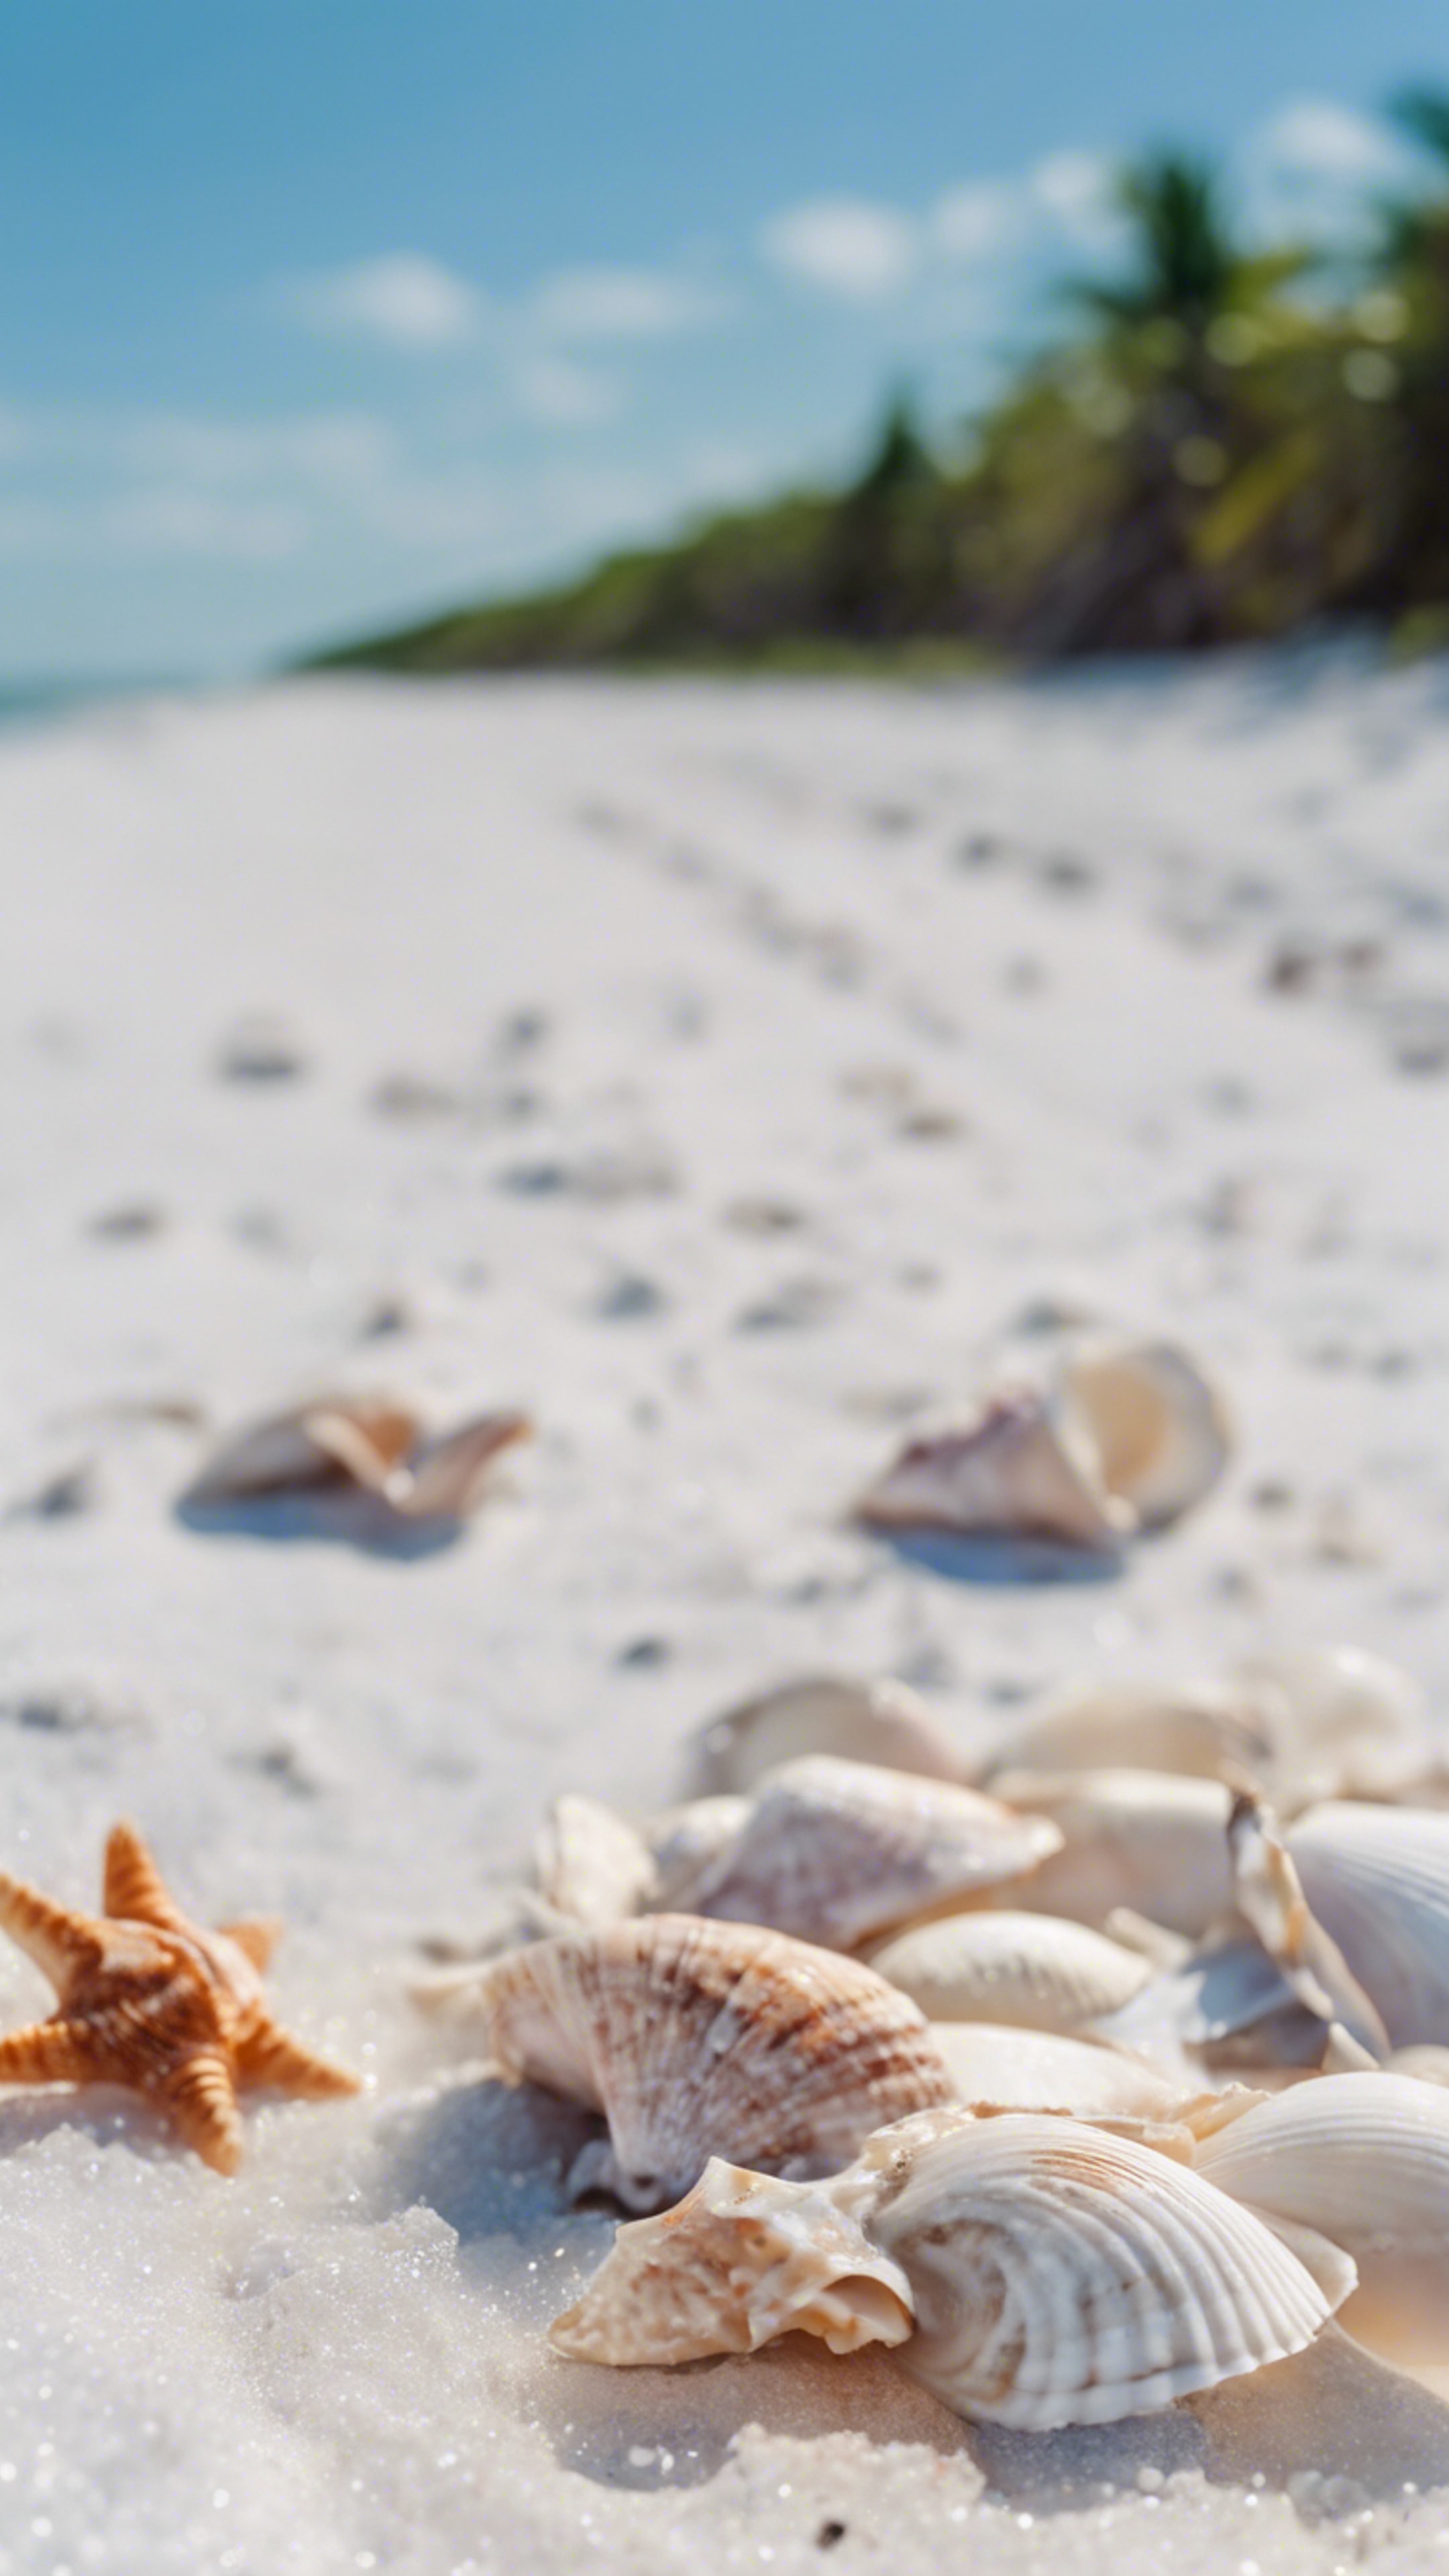 Seashells scattered along the pure white sandy beaches of Sanibel Island under clear, blue skies. Tapeta[1c53aef66a12437c830d]